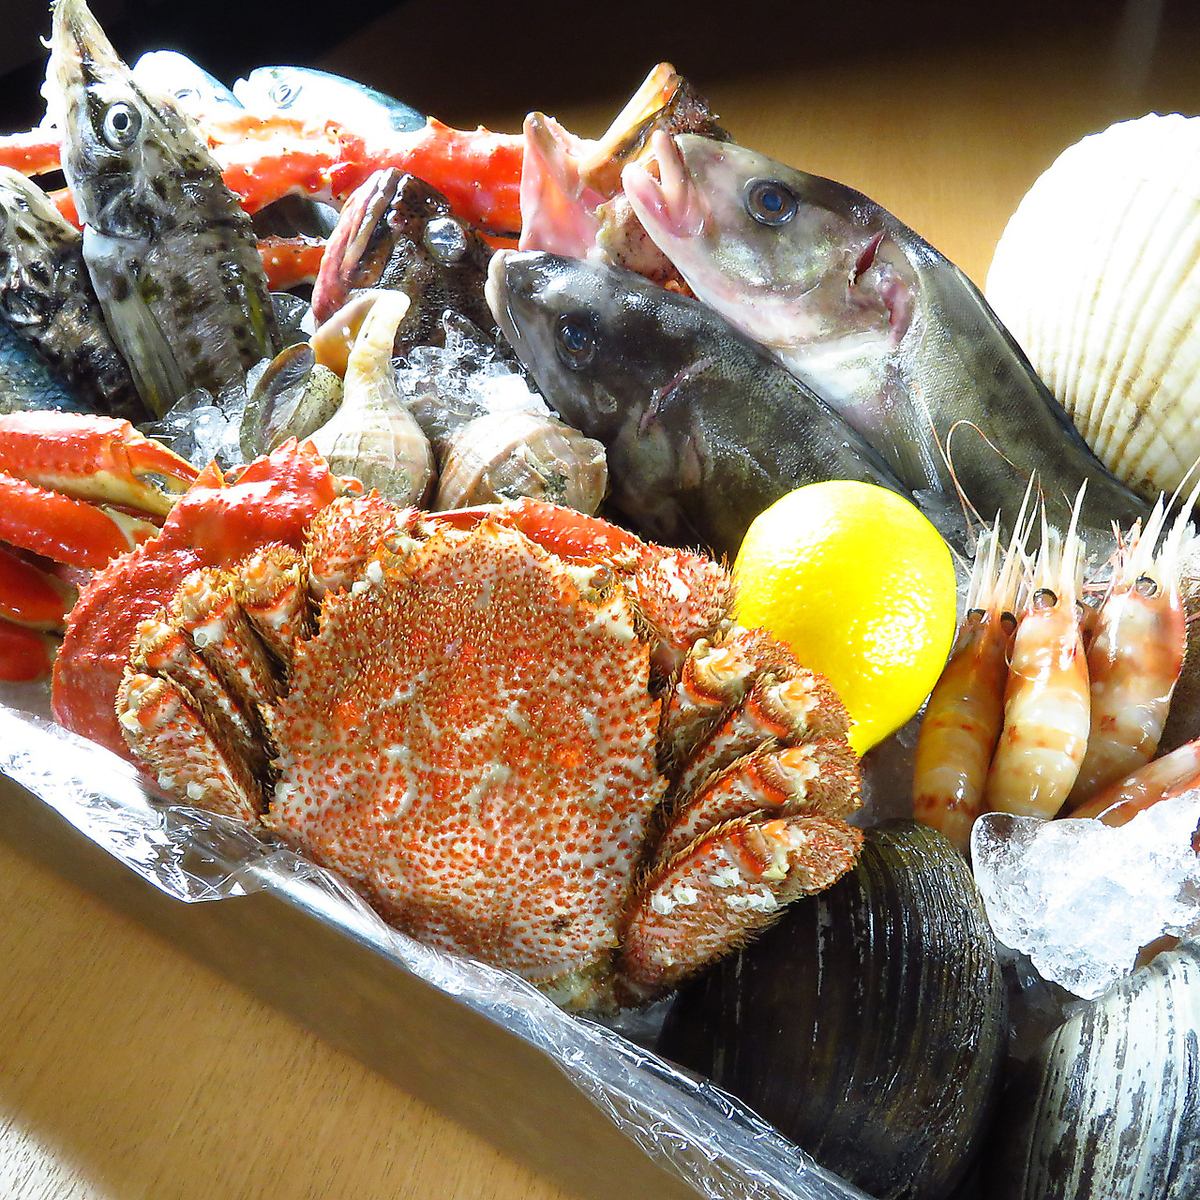 We pride ourselves on our selection of fresh seasonal seafood and sake, including limited editions and items not for sale!